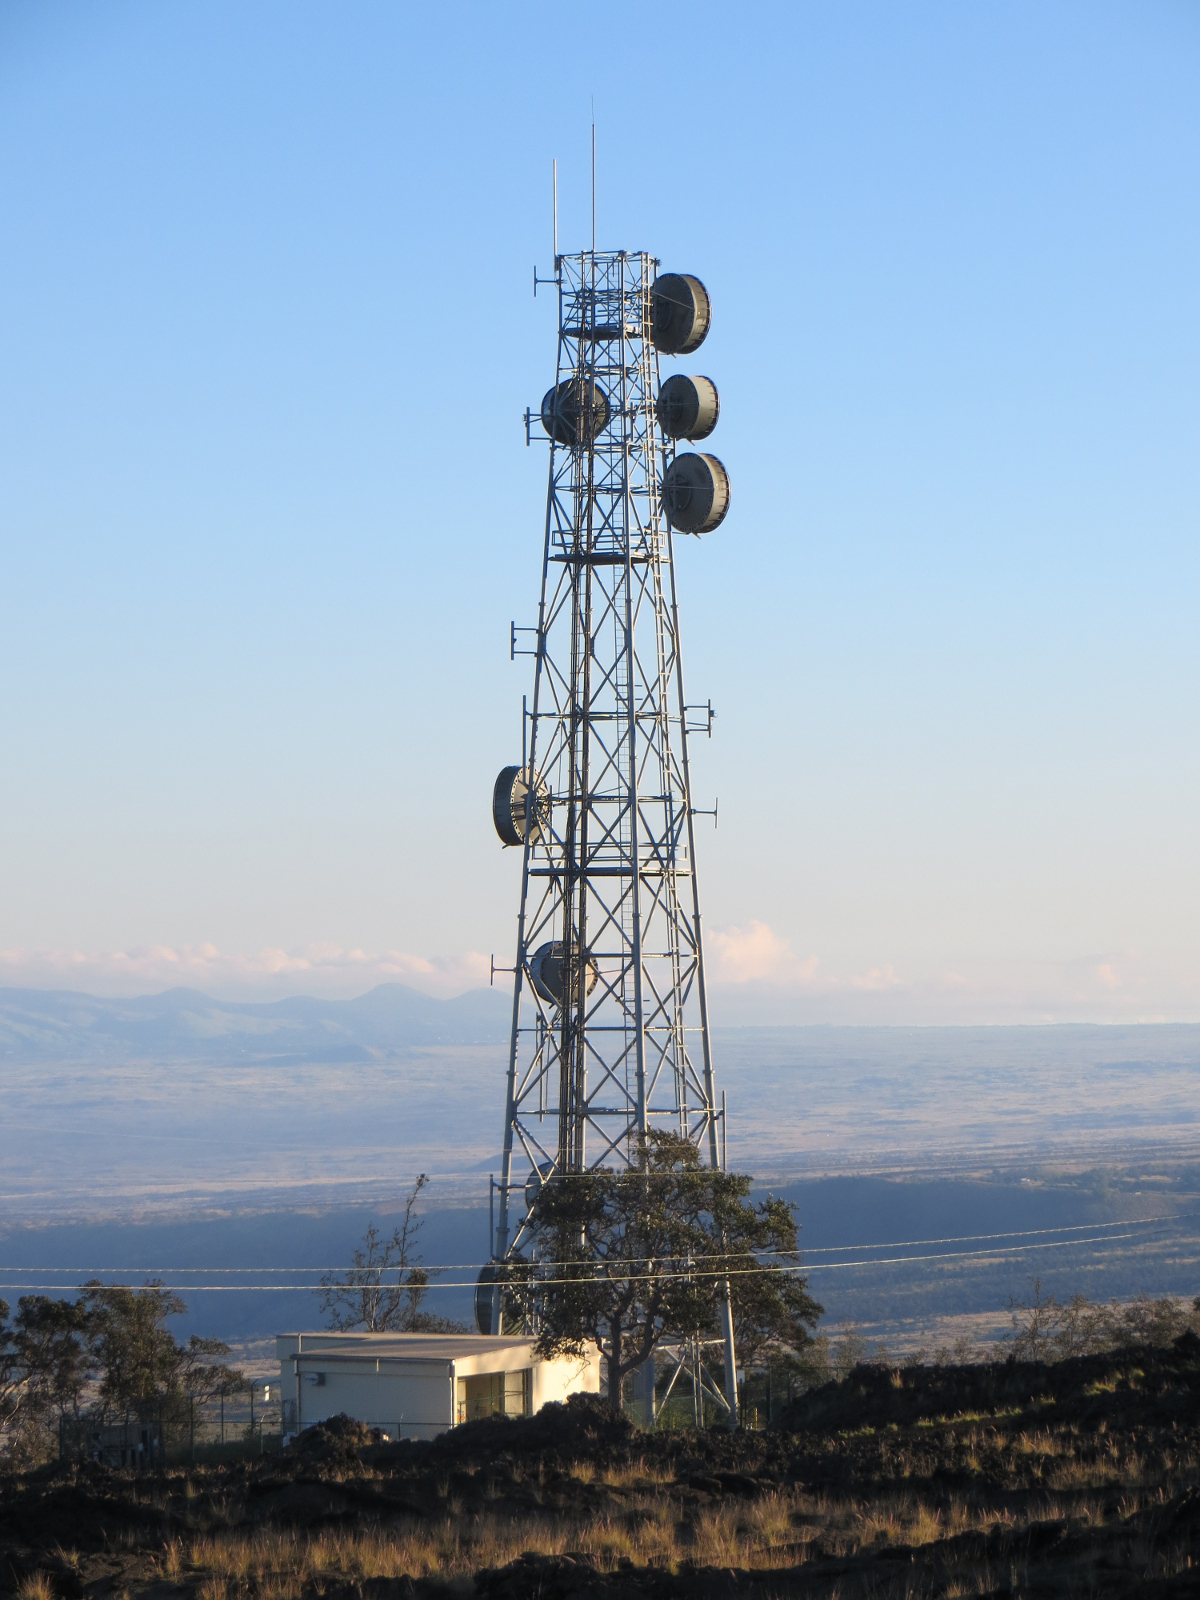 The Kaupulehu tower, one of 15 tower sites that comprise the Anuenue digital microwave system throughout the Hawaiian Islands (U.S. Coast Guard photo)